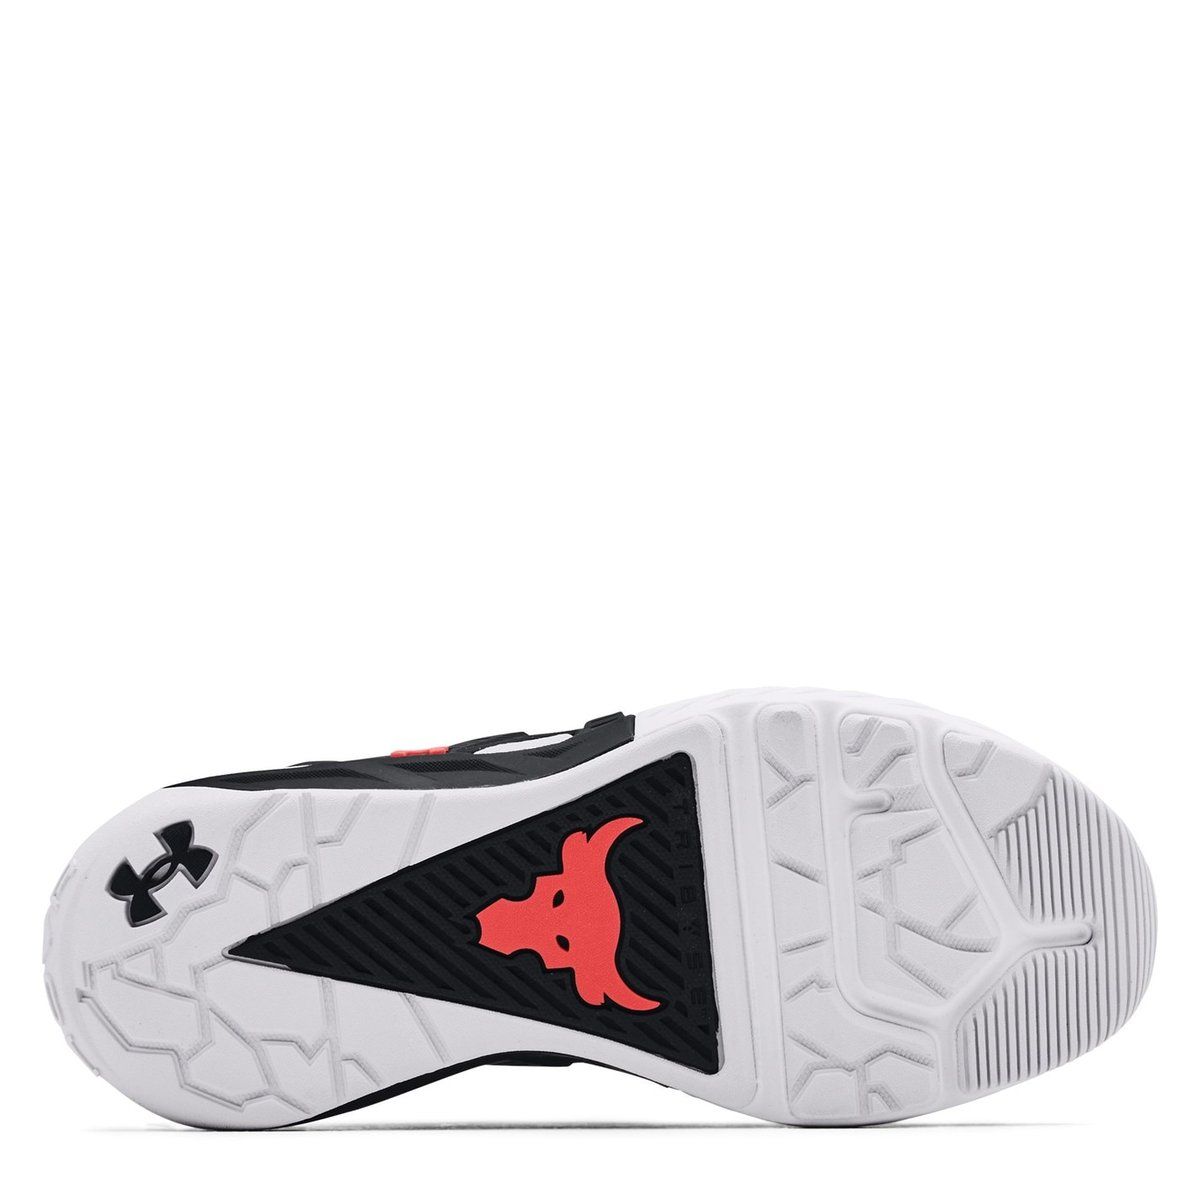 Under Armour Project Rock 2 Performance Review - WearTesters